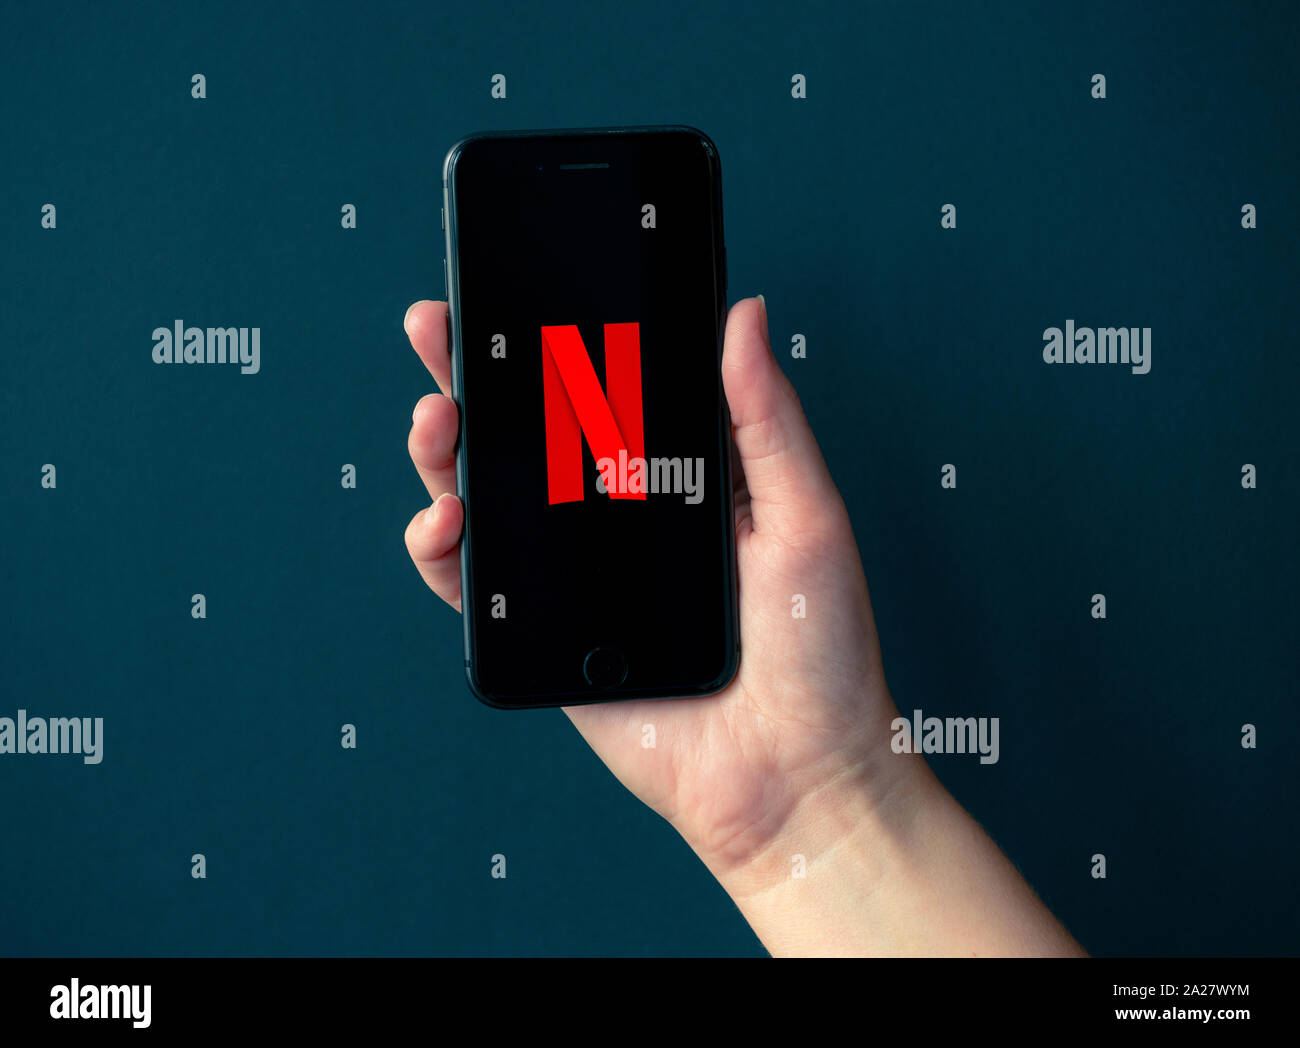 Kyiv, Ukraine - October 1, 2019: Studio shot of hand holding Apple iPhone 8 with Netflix logotype on a screen. Isolated on a black paper background. Stock Photo